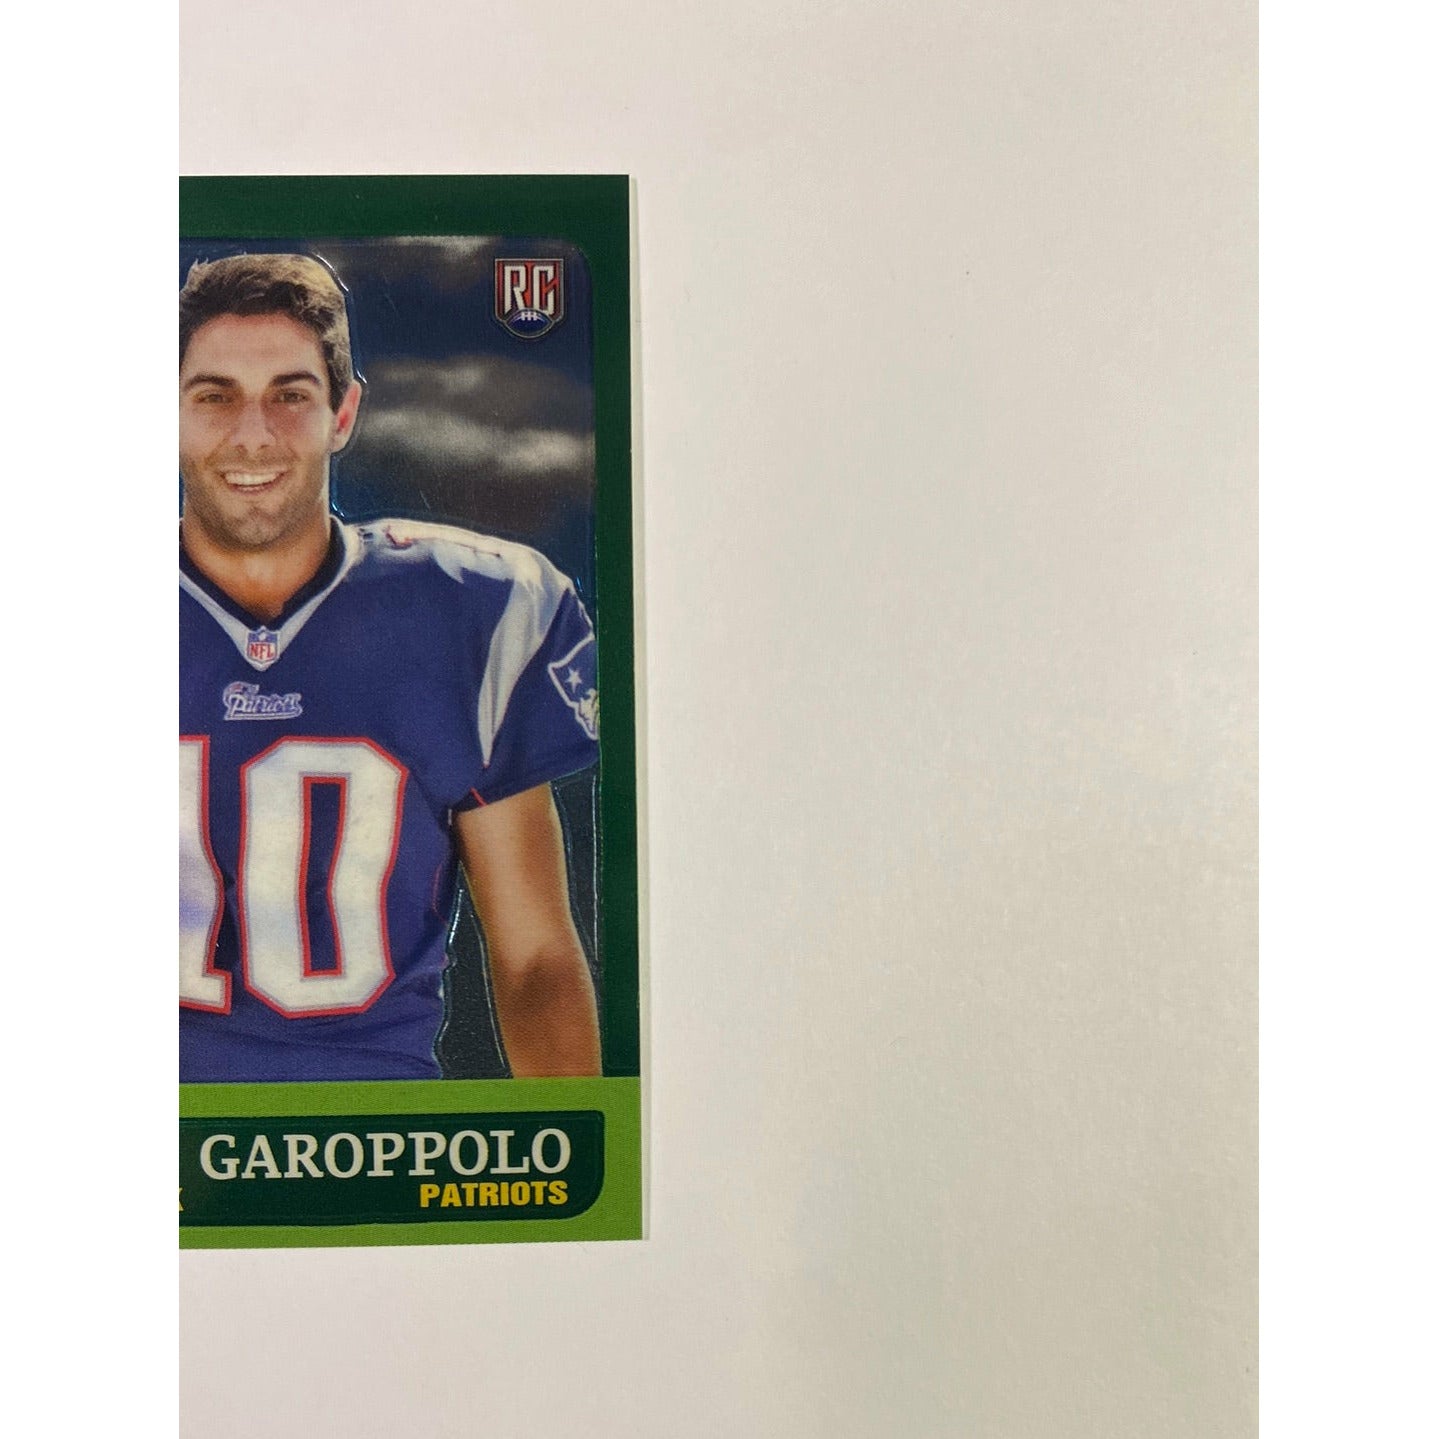  2014 Topps Chrome Mini Jimmy Garoppolo RC  Local Legends Cards & Collectibles